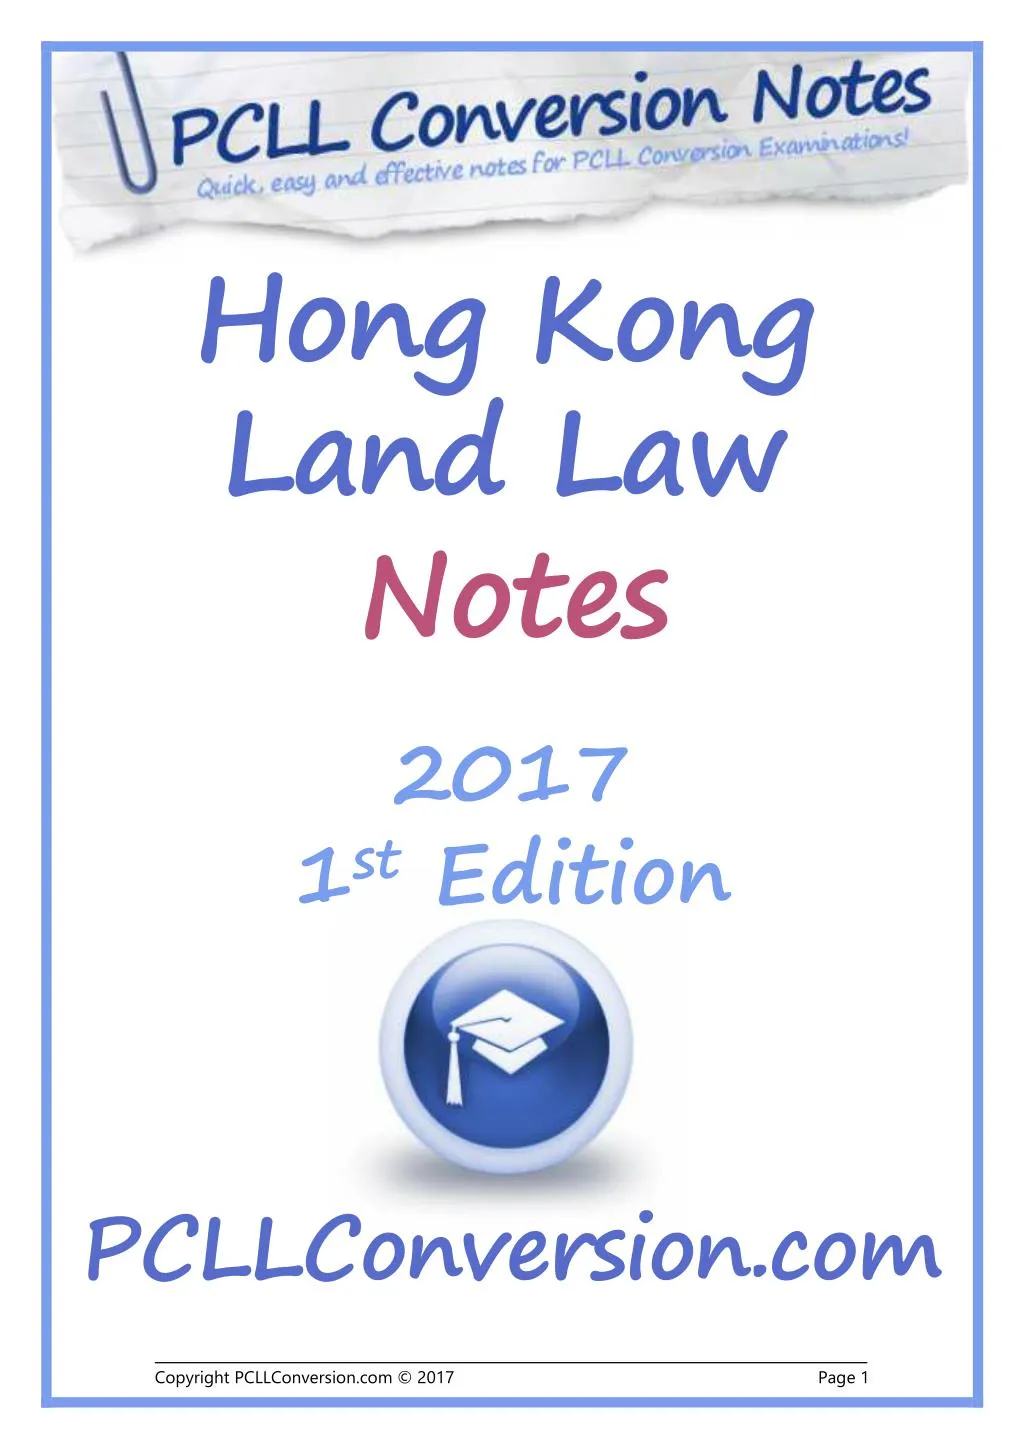 quick easy and effective notes for pcll